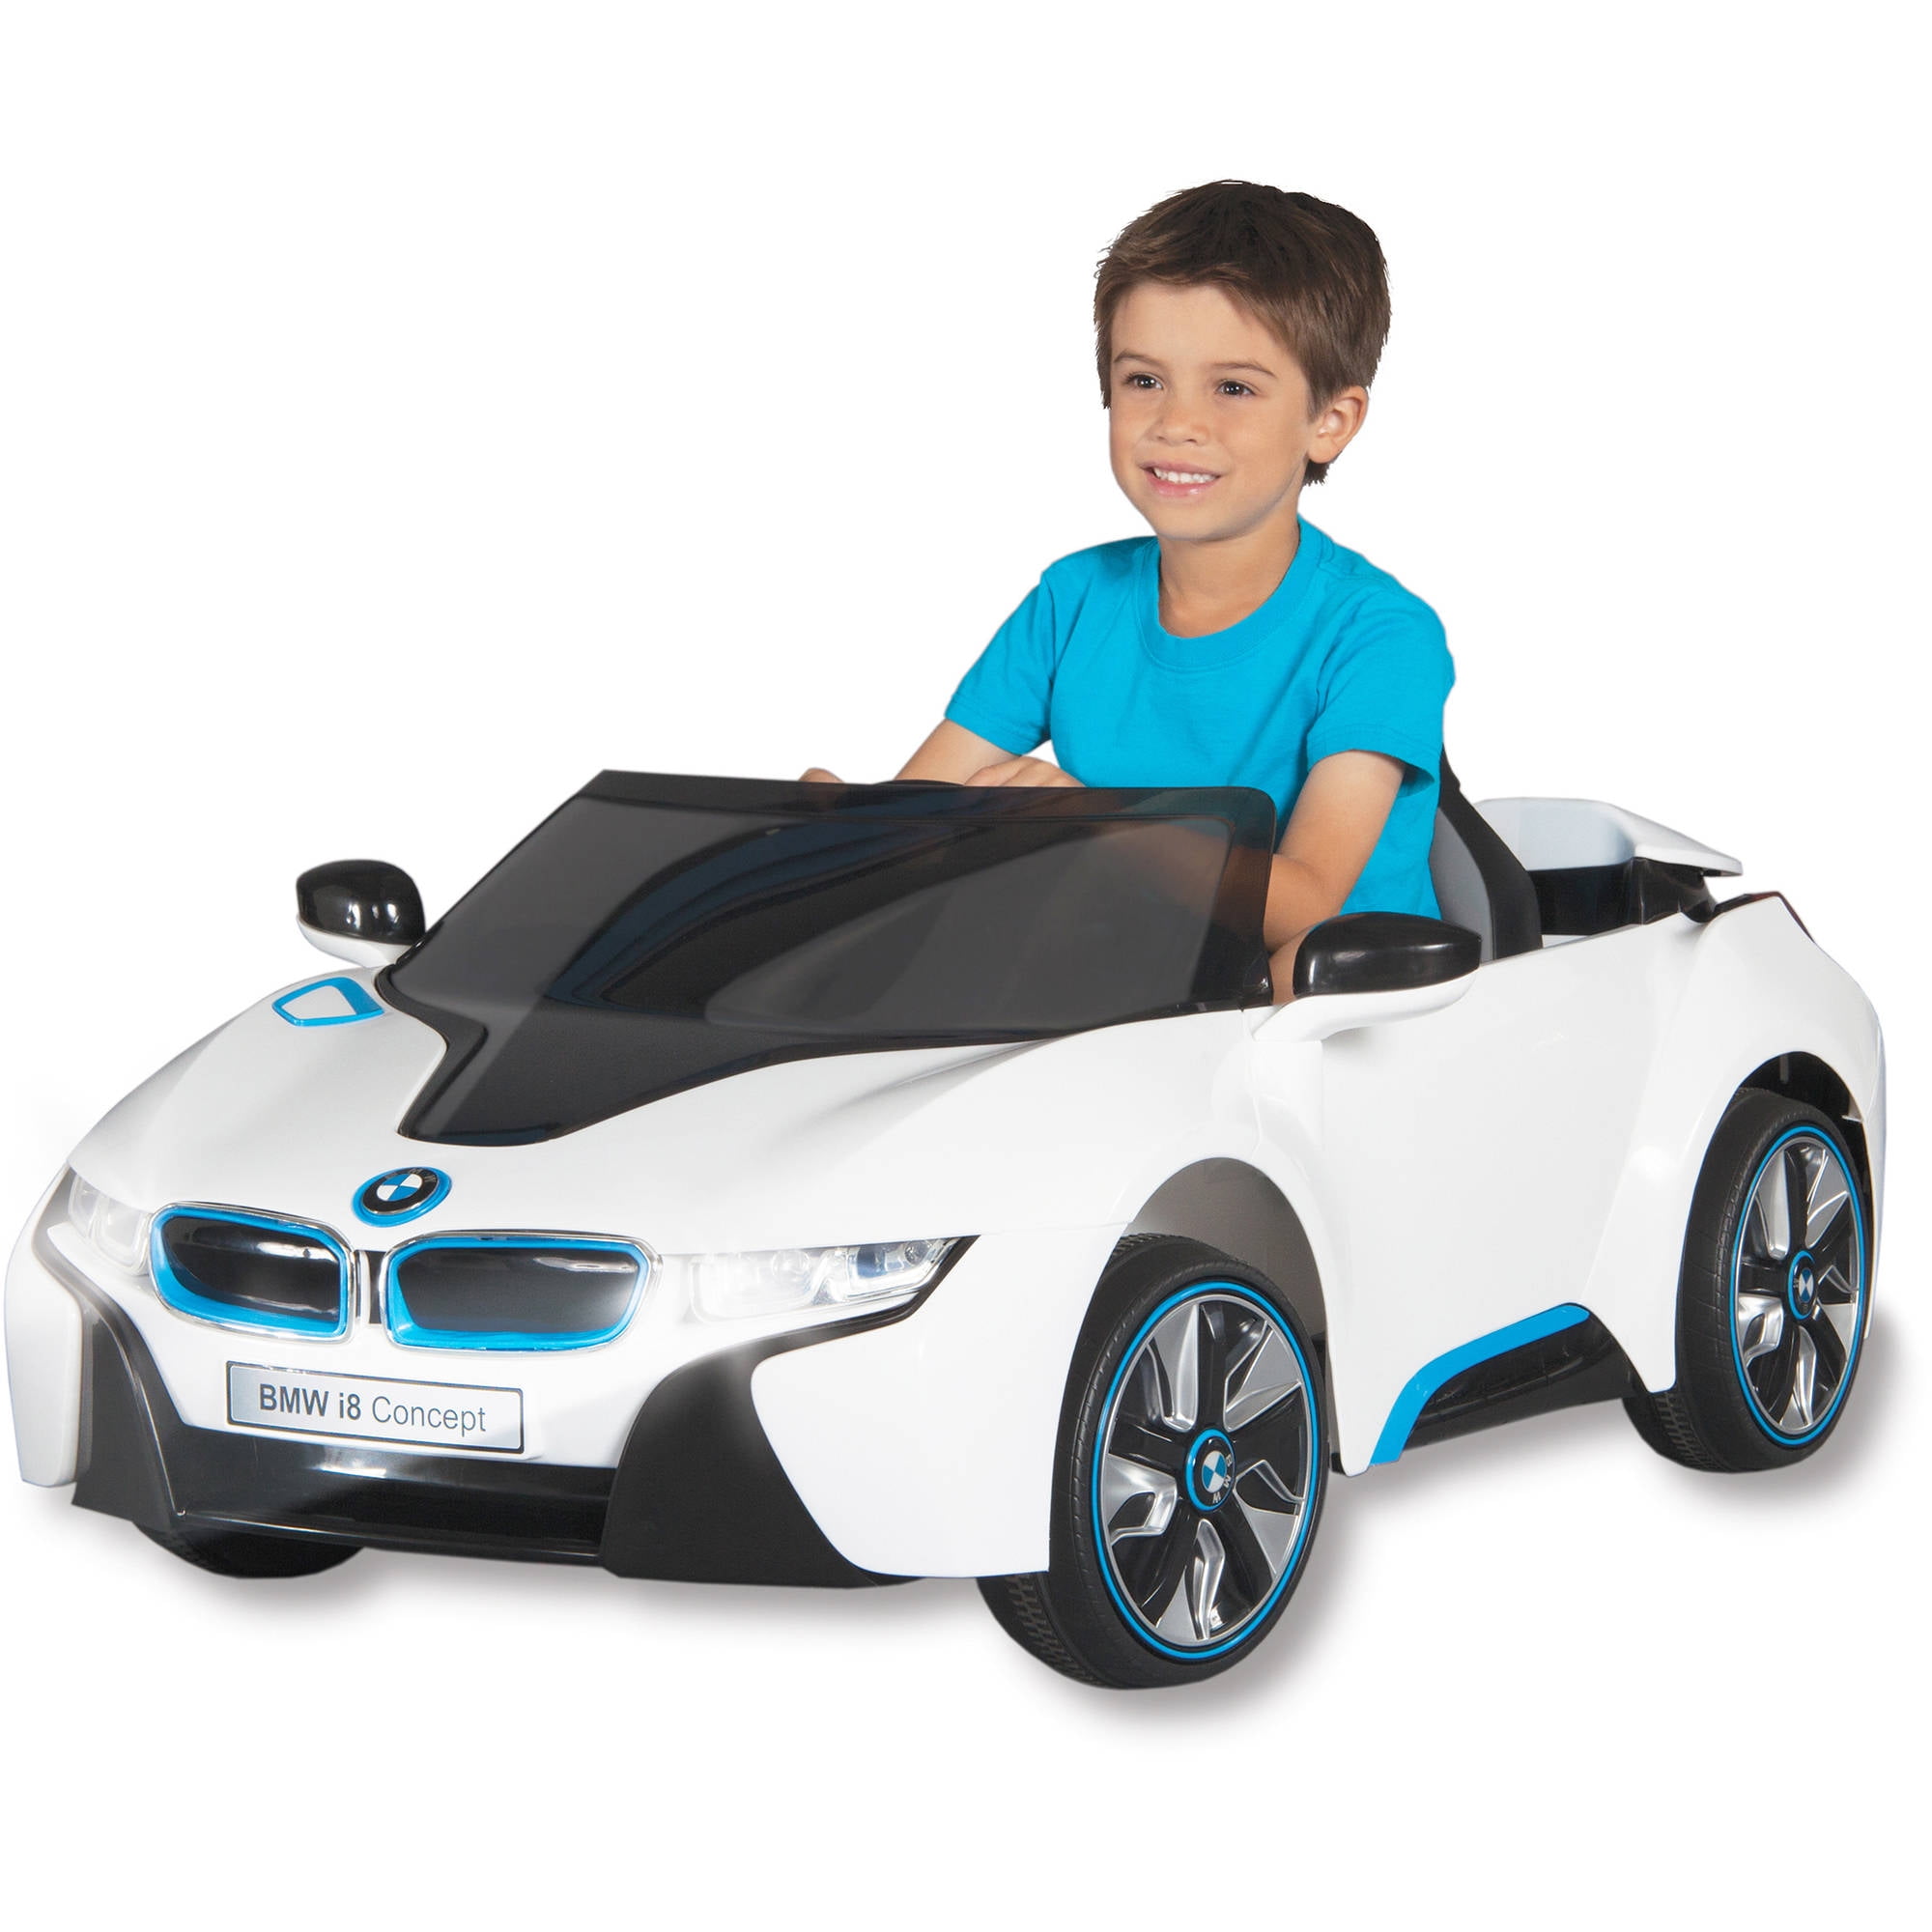 Max Capacity: 30 KGS PINK Suitable for Age: 3-6 Years Old Model: S2188 Sports Innovation B.M.W Style PINK Kids 2x6V 15W TWO MOTORS Battery Powered B.M.W Style Electric Ride On Toy Car